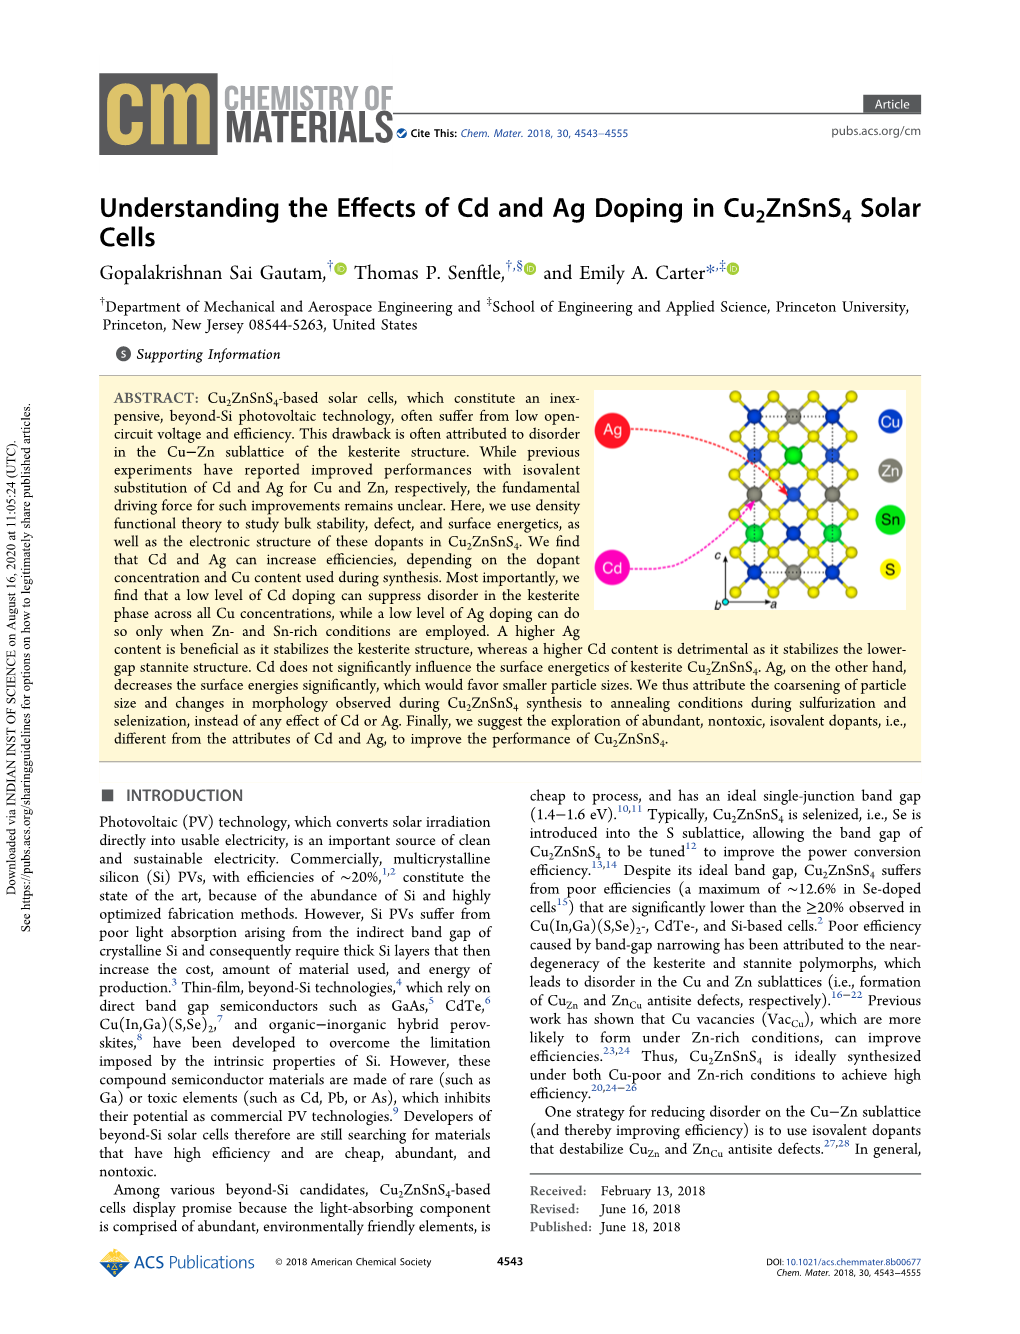 Understanding the Effects of Cd and Ag Doping in Cu2znsns4 Solar Cells